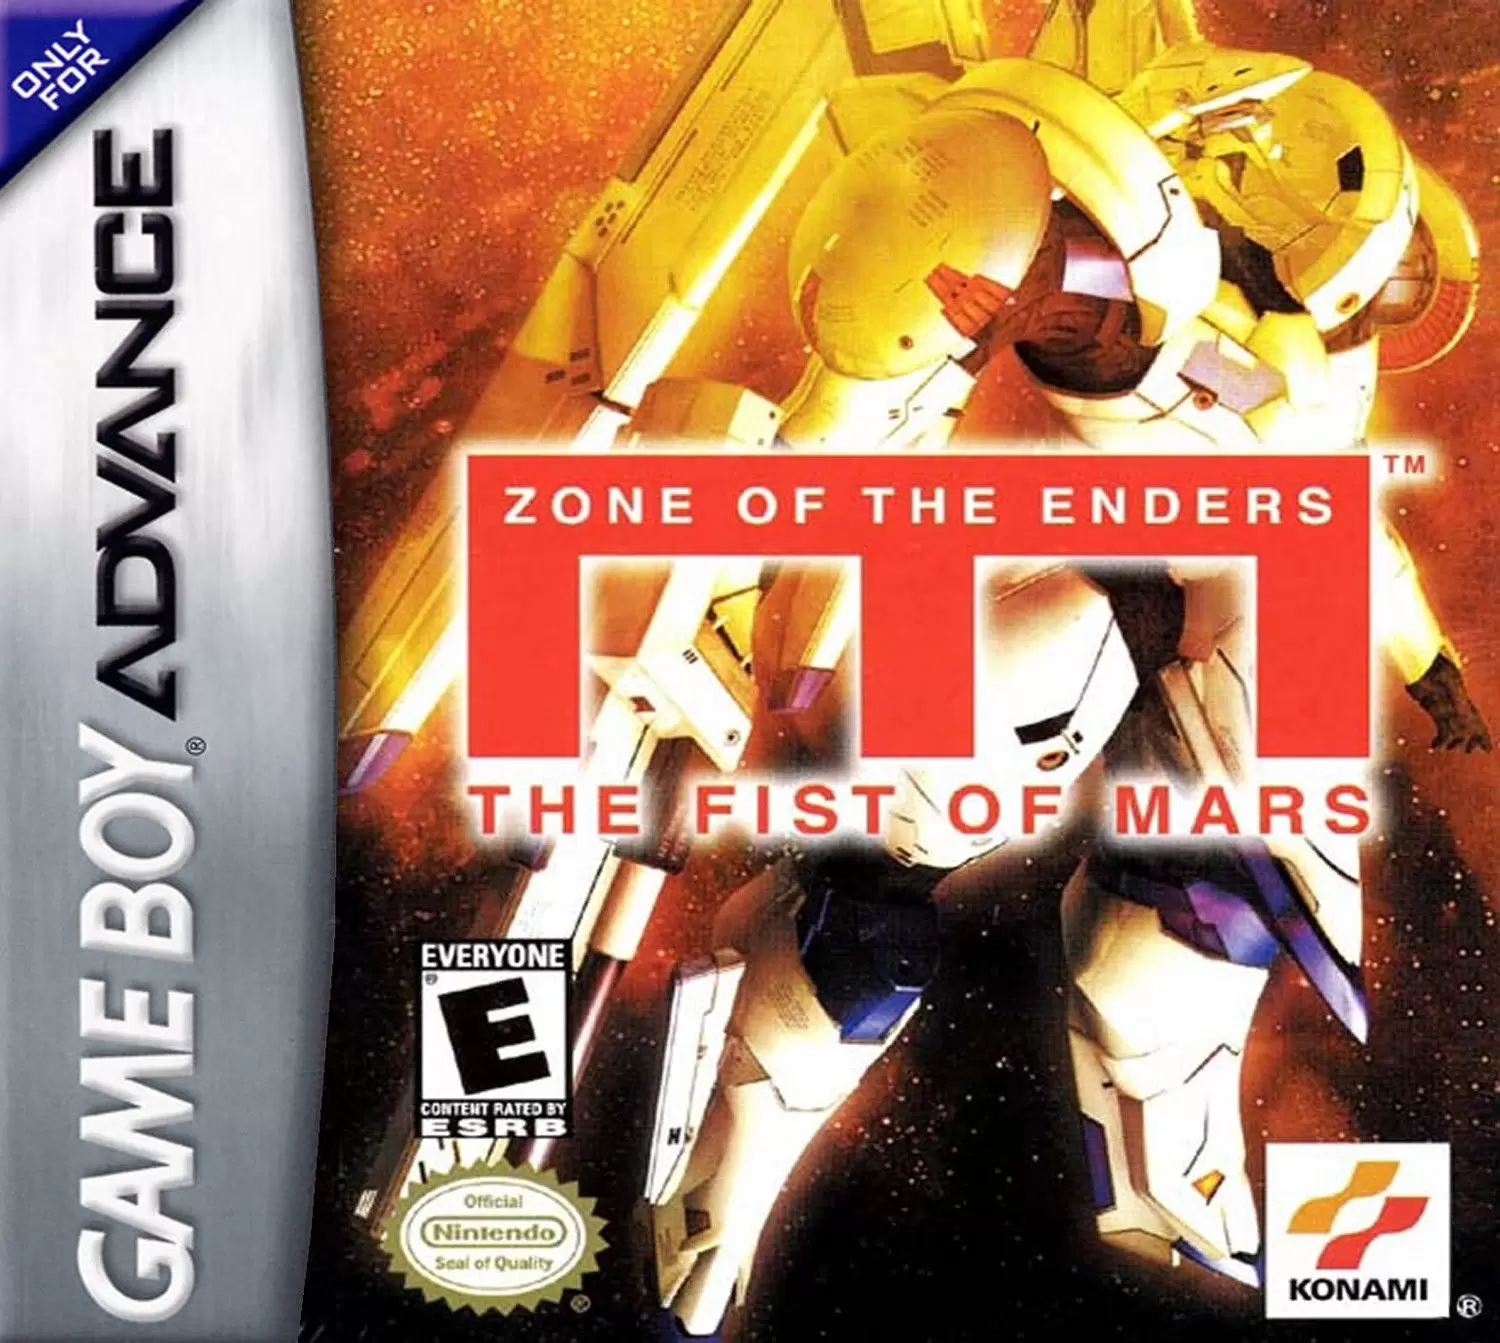 Game Boy Advance Games - Zone of the Enders: The Fist of Mars